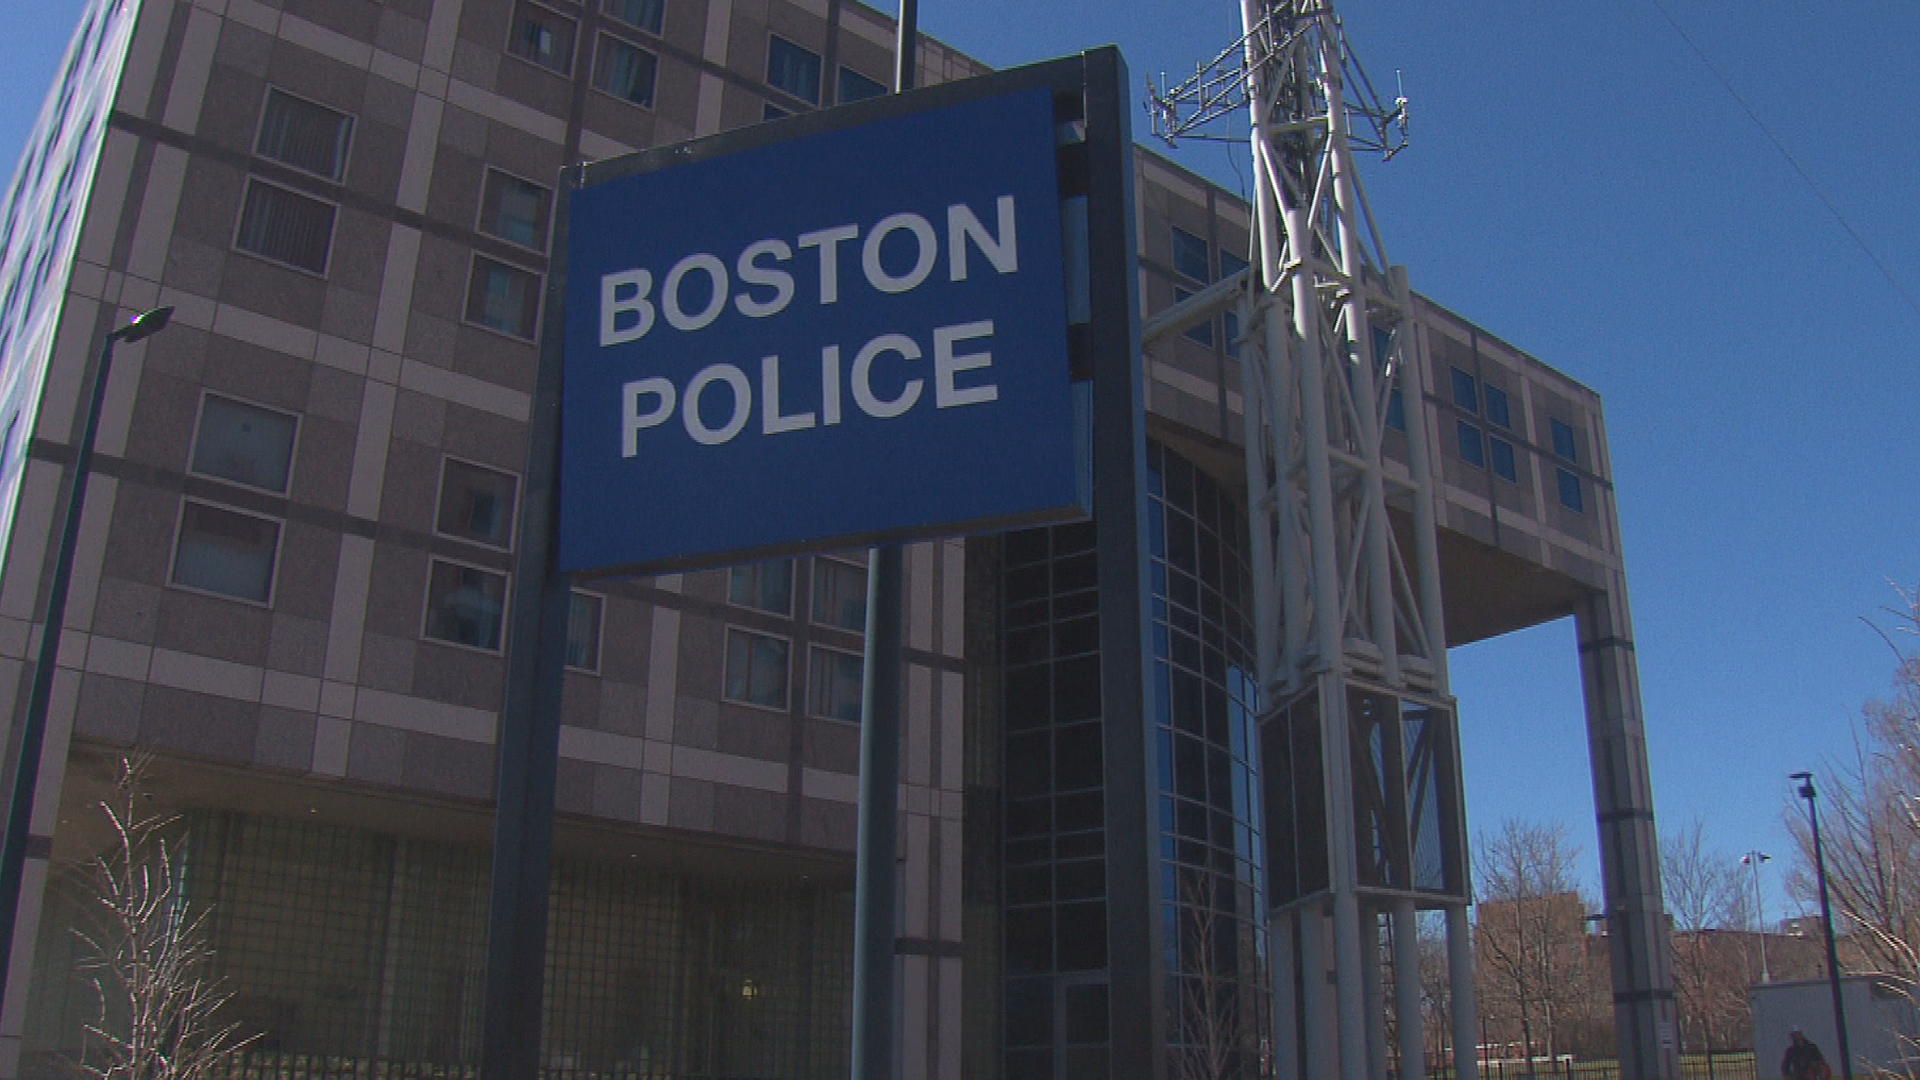 Boston City Council Questions Police Use Of Secret Phone Tracking Equipment